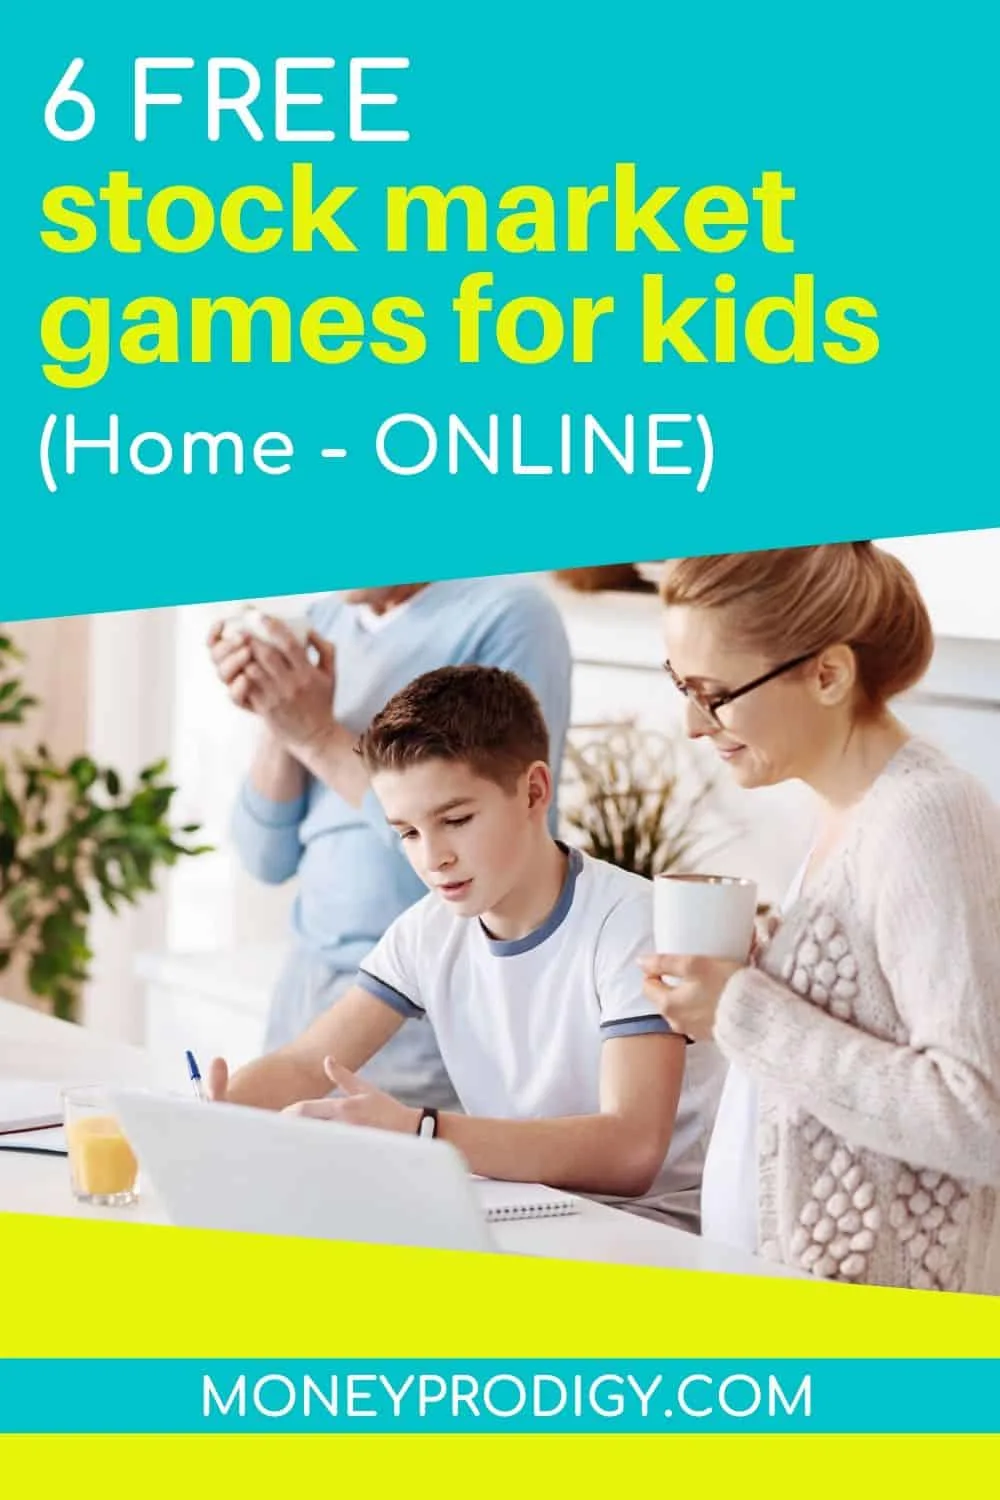 teen child with his mother working on investing game online, text overlay "6 free stock market games for kids - home, online"